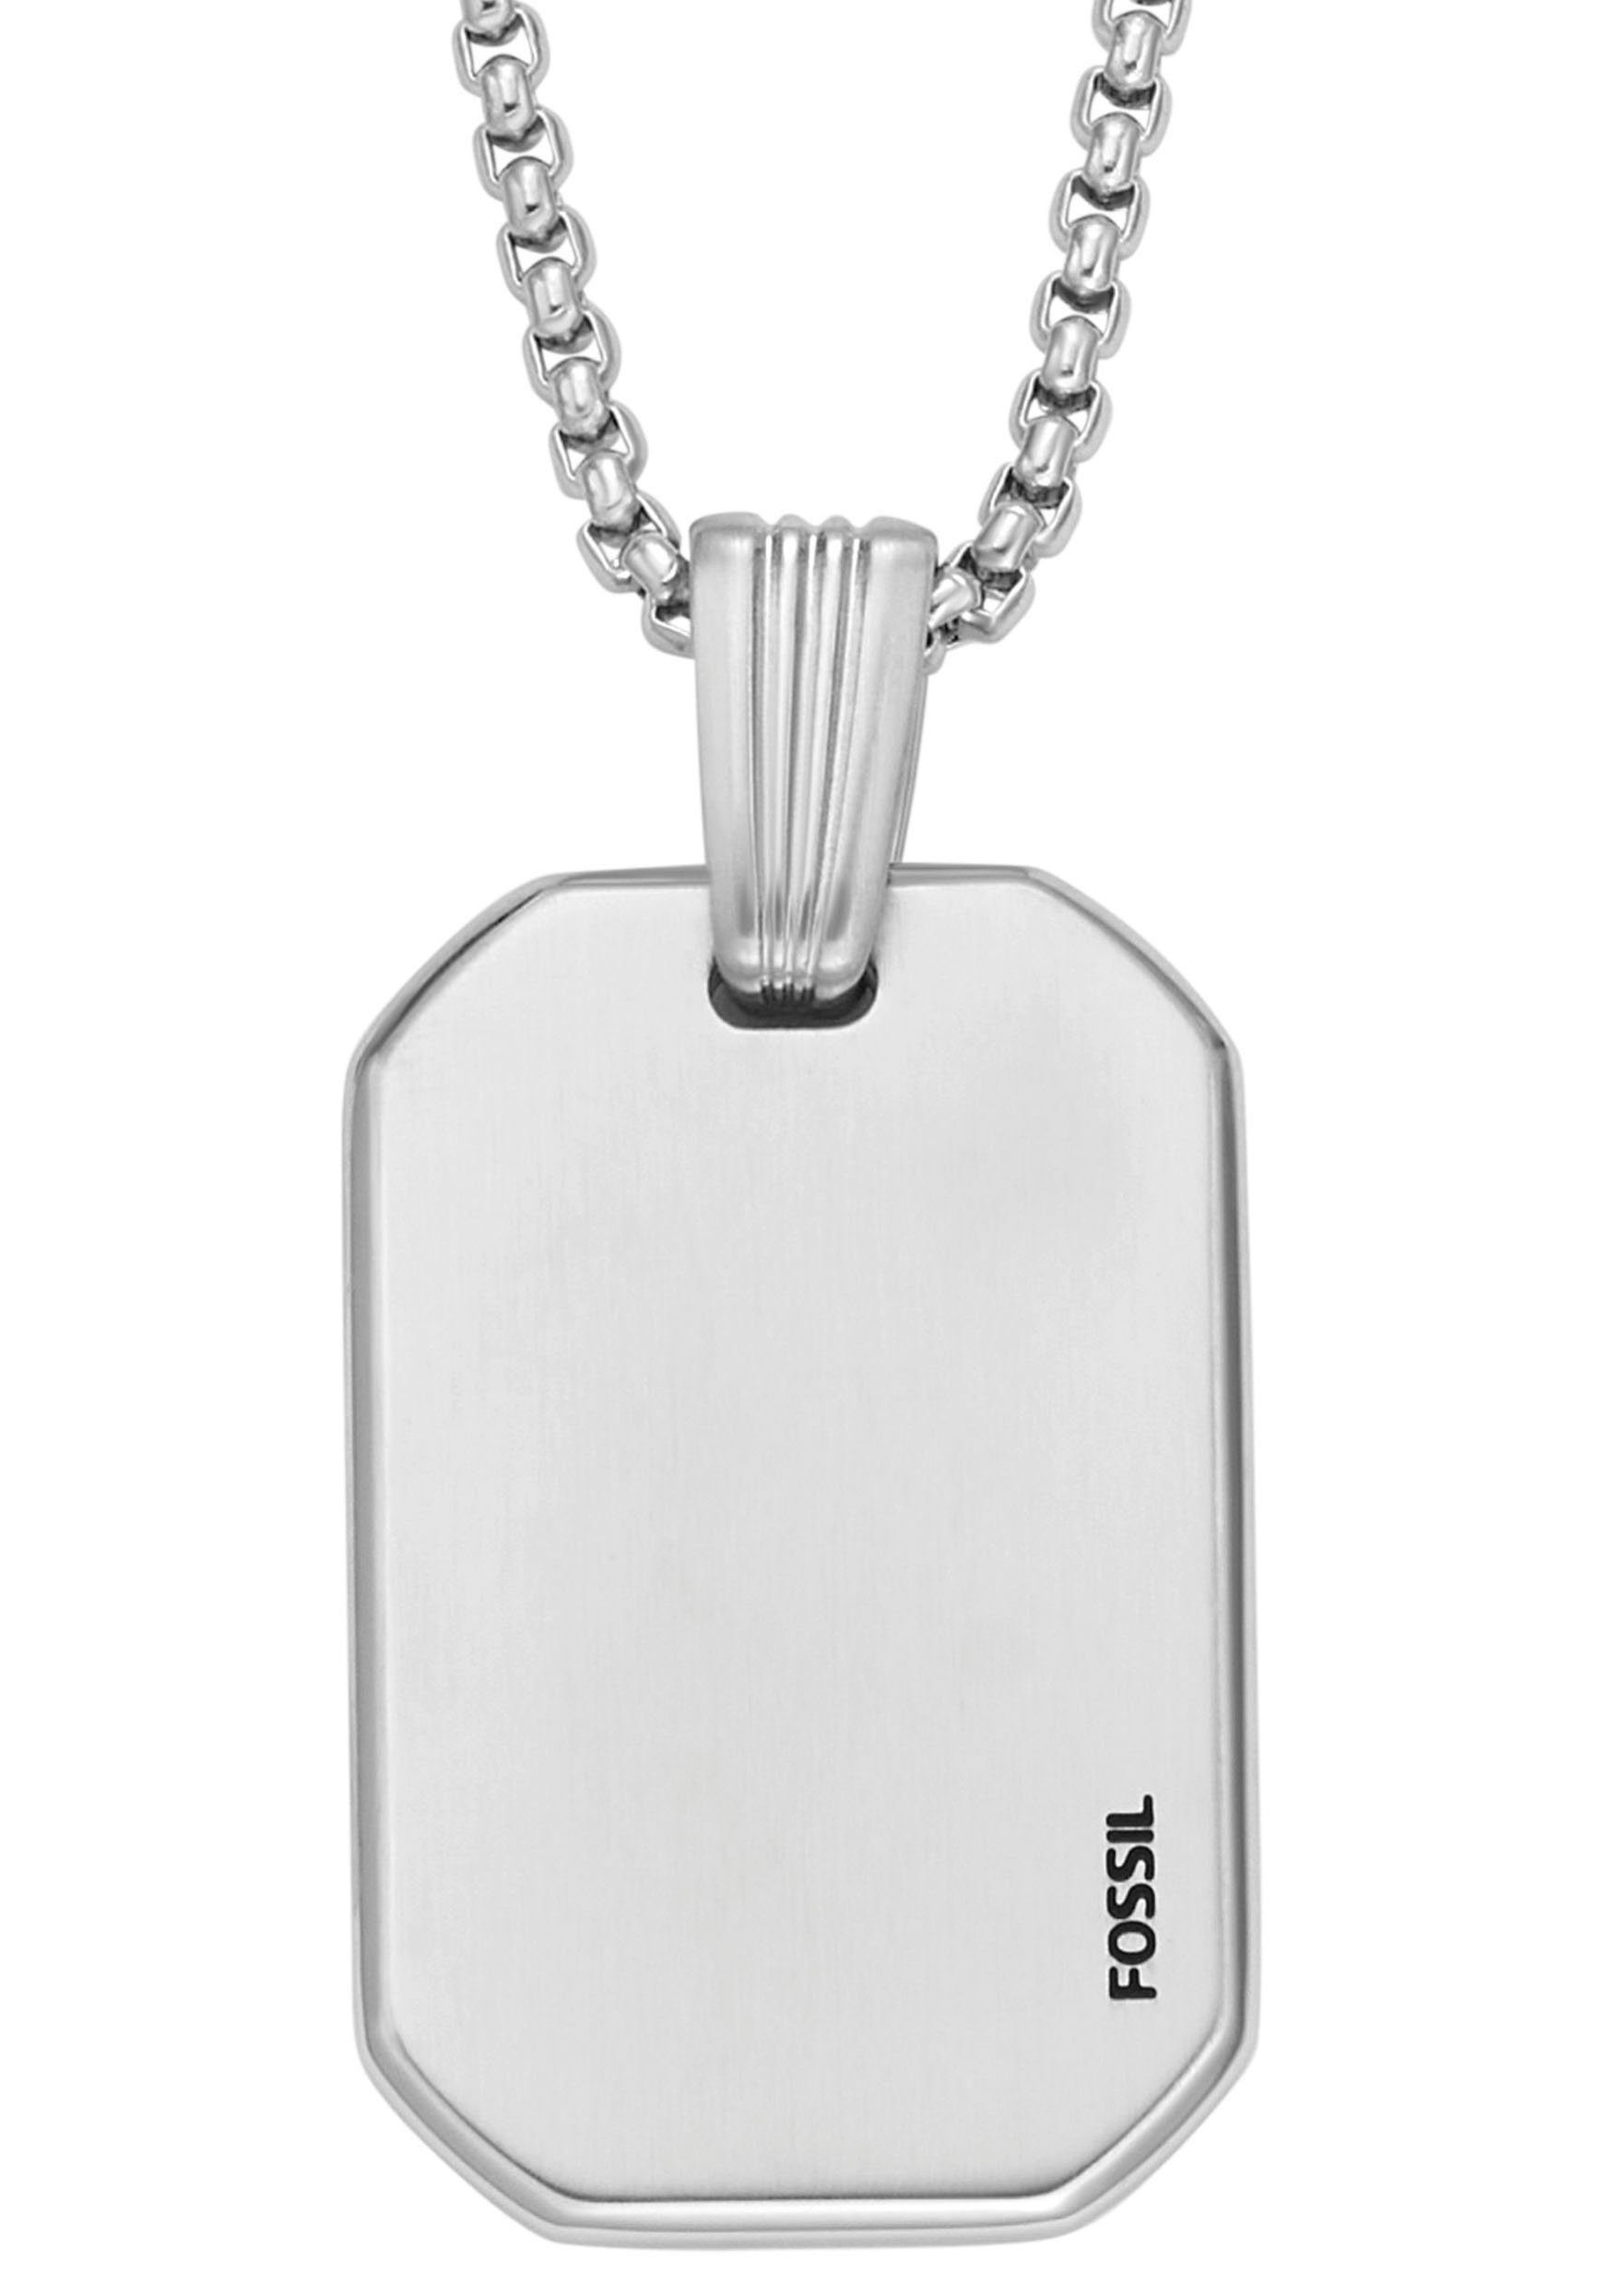 Dog Tag Stainless Steel Necklace - JF00494998 - Fossil